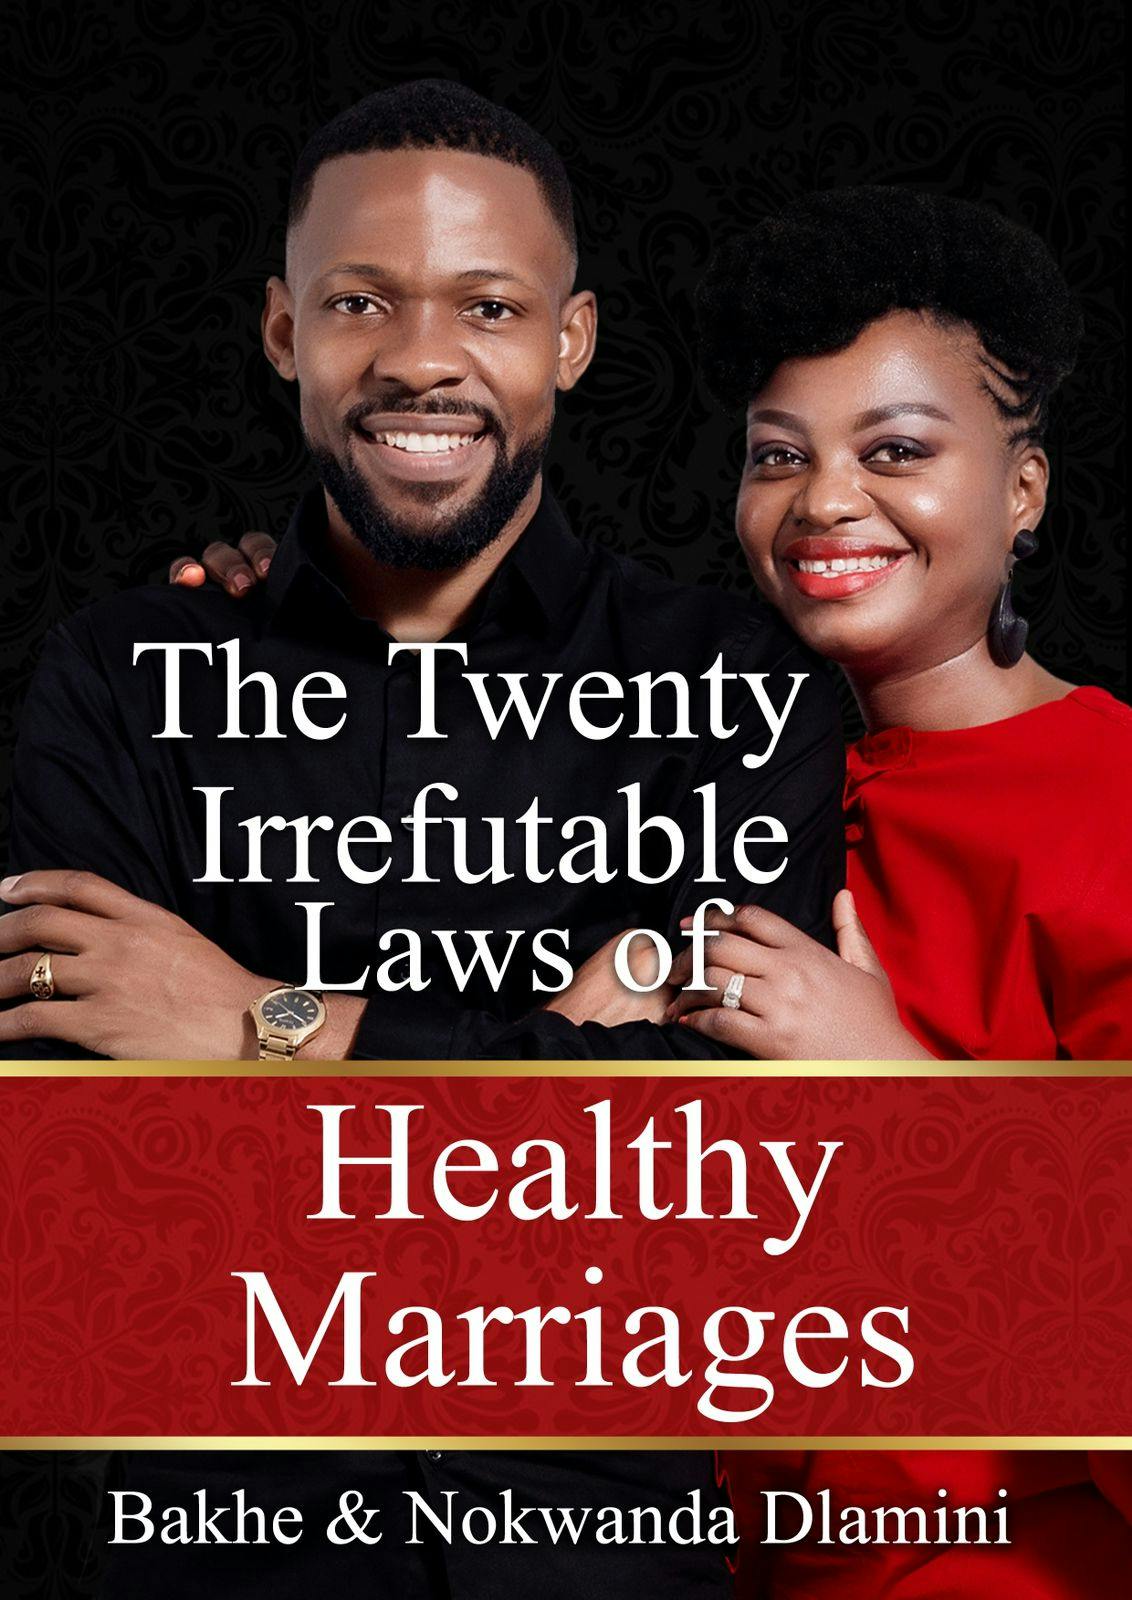 The 20 Irrefutable Laws of Healthy Marriages is a simple and fun read. Bakhe and Nokwanda bring their youthfulness into this book. They together tackles critical issues that are quite relevant to the twenty first century marriage. The twenty irrefutable laws of healthy marriages compiled in this book are based on timeless and universal principles. They are laws that govern life. We can either act in harmony with them or break ourselves against them. What is key is building healthy marriages, not just marriages. Have this book take you on a journey of building a healthy, exciting, and fulfilling marriage.